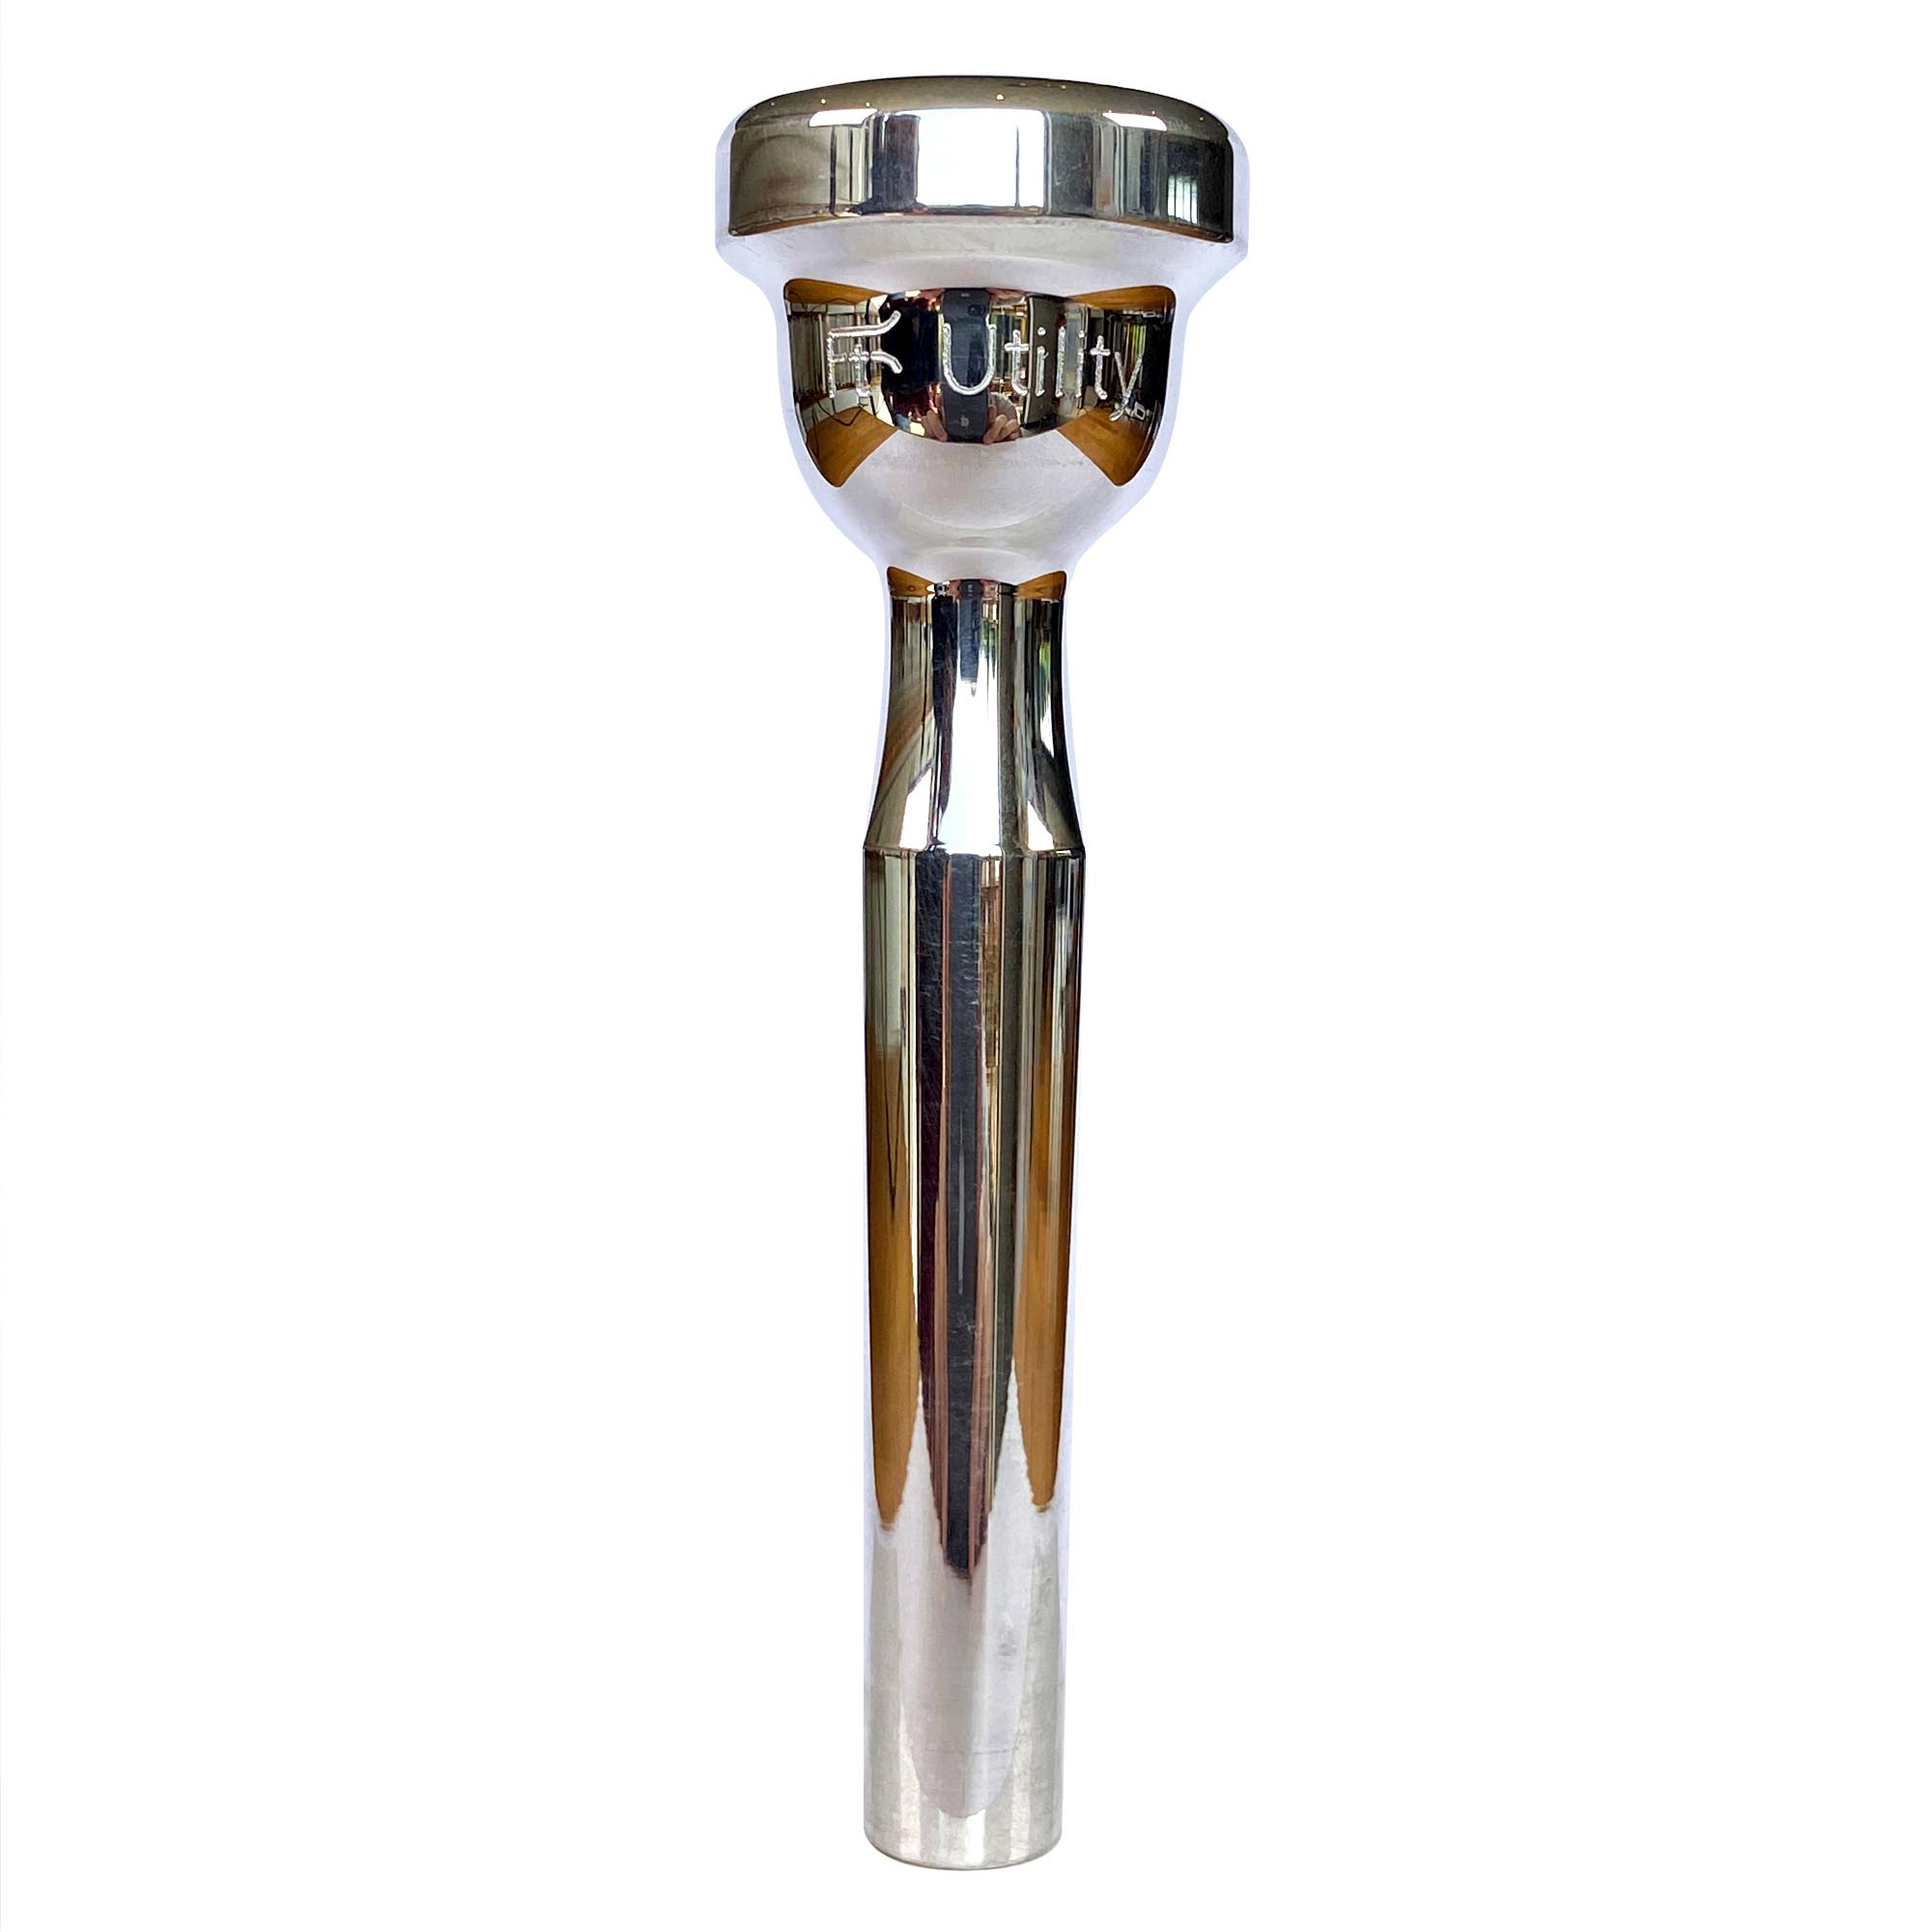 Fultone Brass - Ft Series Mouthpieces - Commercial - Utility Mouthpiece